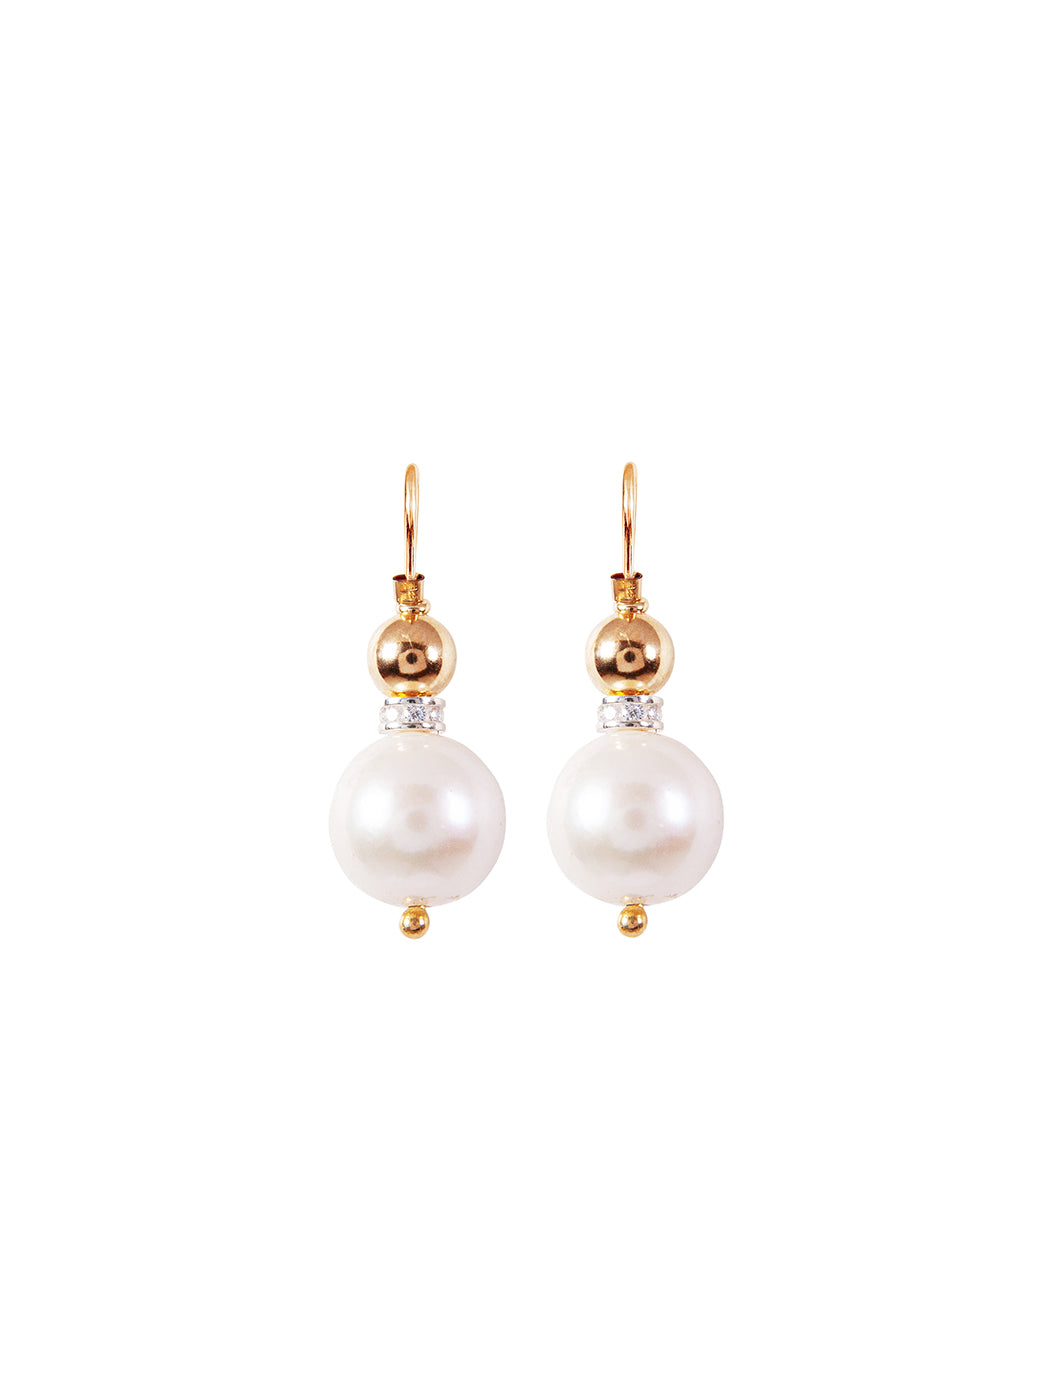 Fiorina Jewellery Elite Double Ball Earrings Pearl Gold Highlights